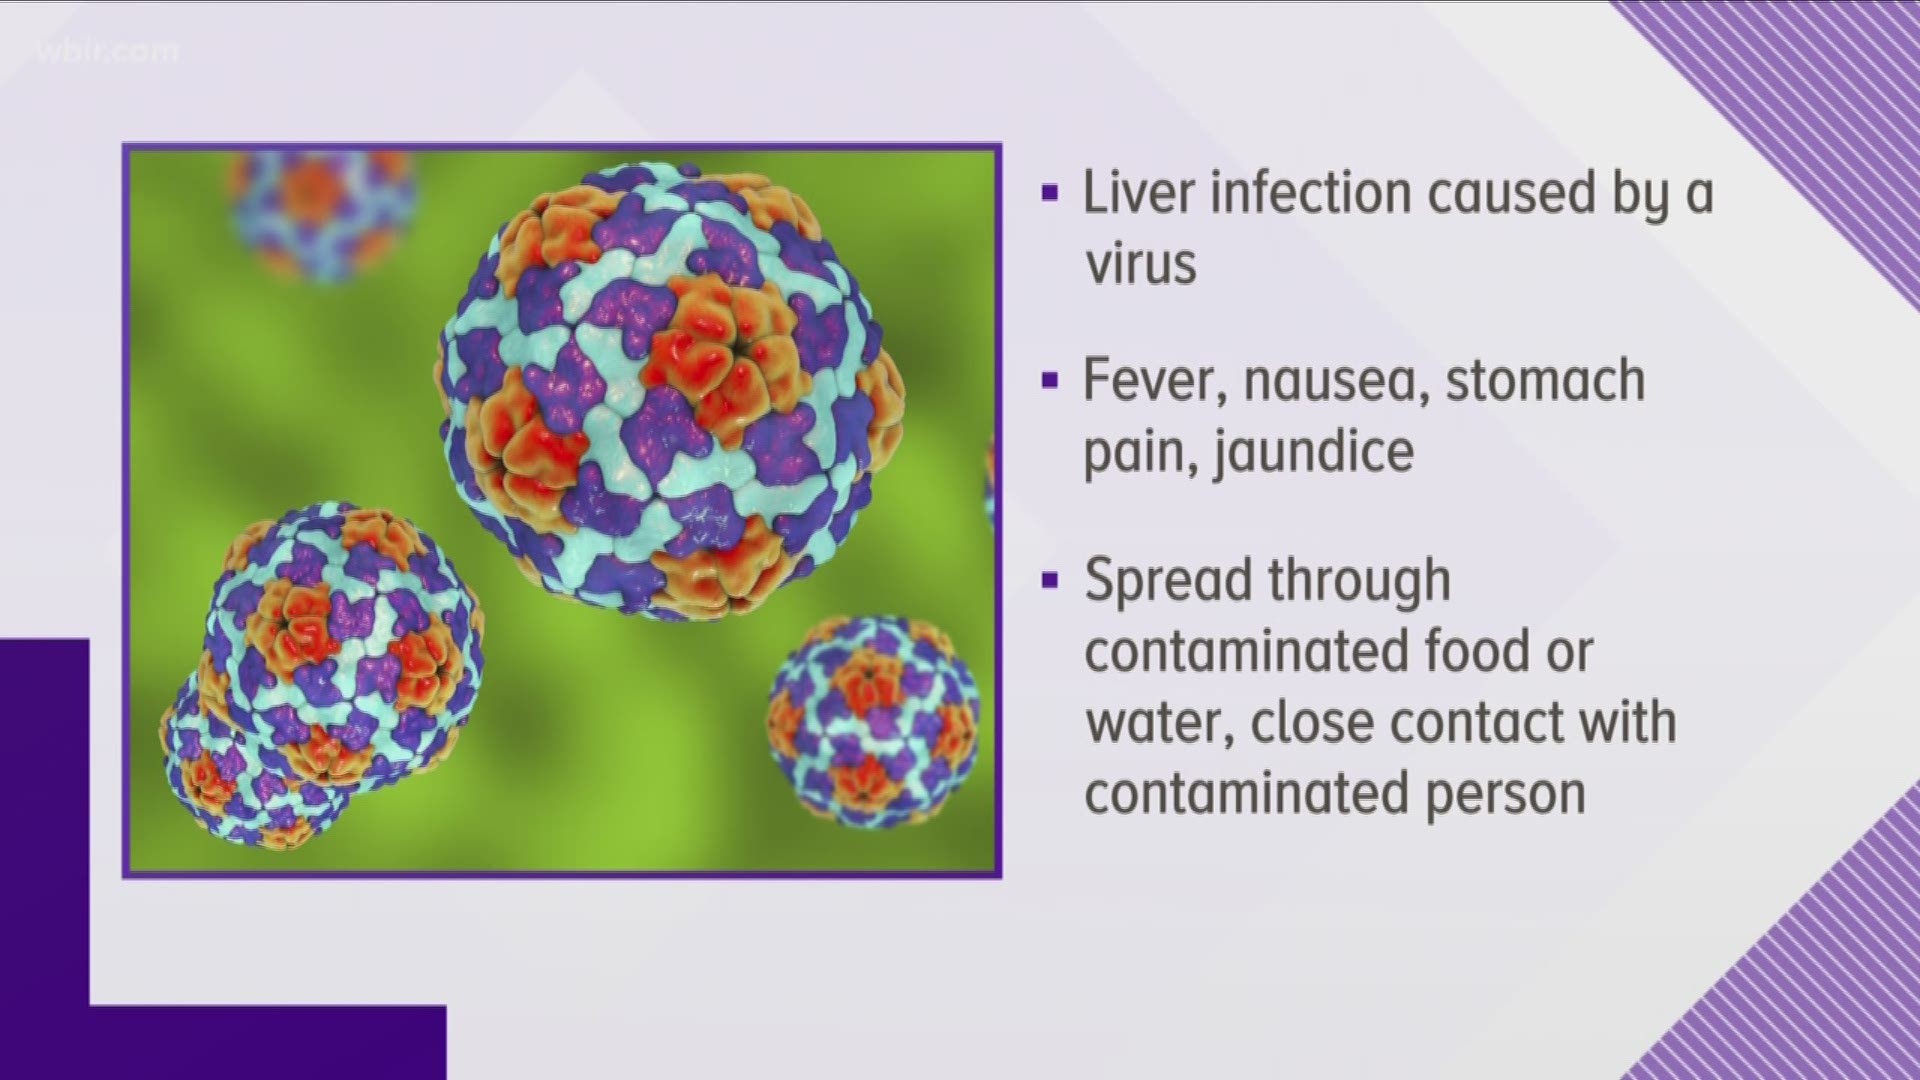 Hepatitis A is a liver infection caused by a virus that causes fever, nausea, vomiting, abdominal pain, dark urine, and a yellowing of the eyes and skin known as jaundice.